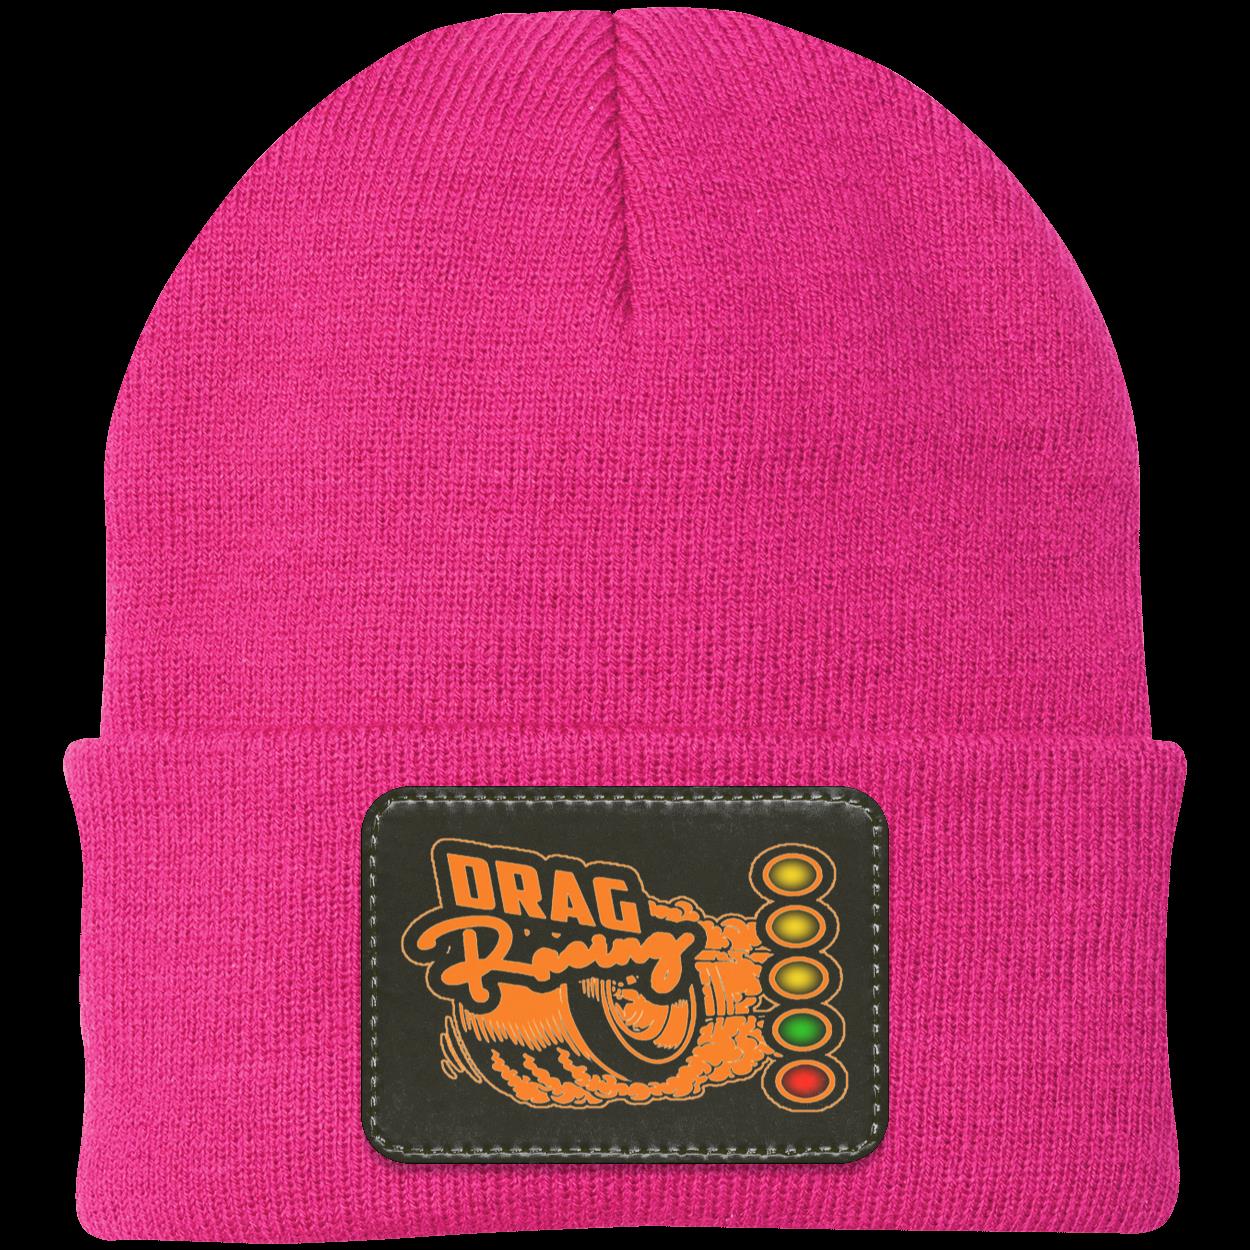 Drag Racing Patched Knit Cap V10